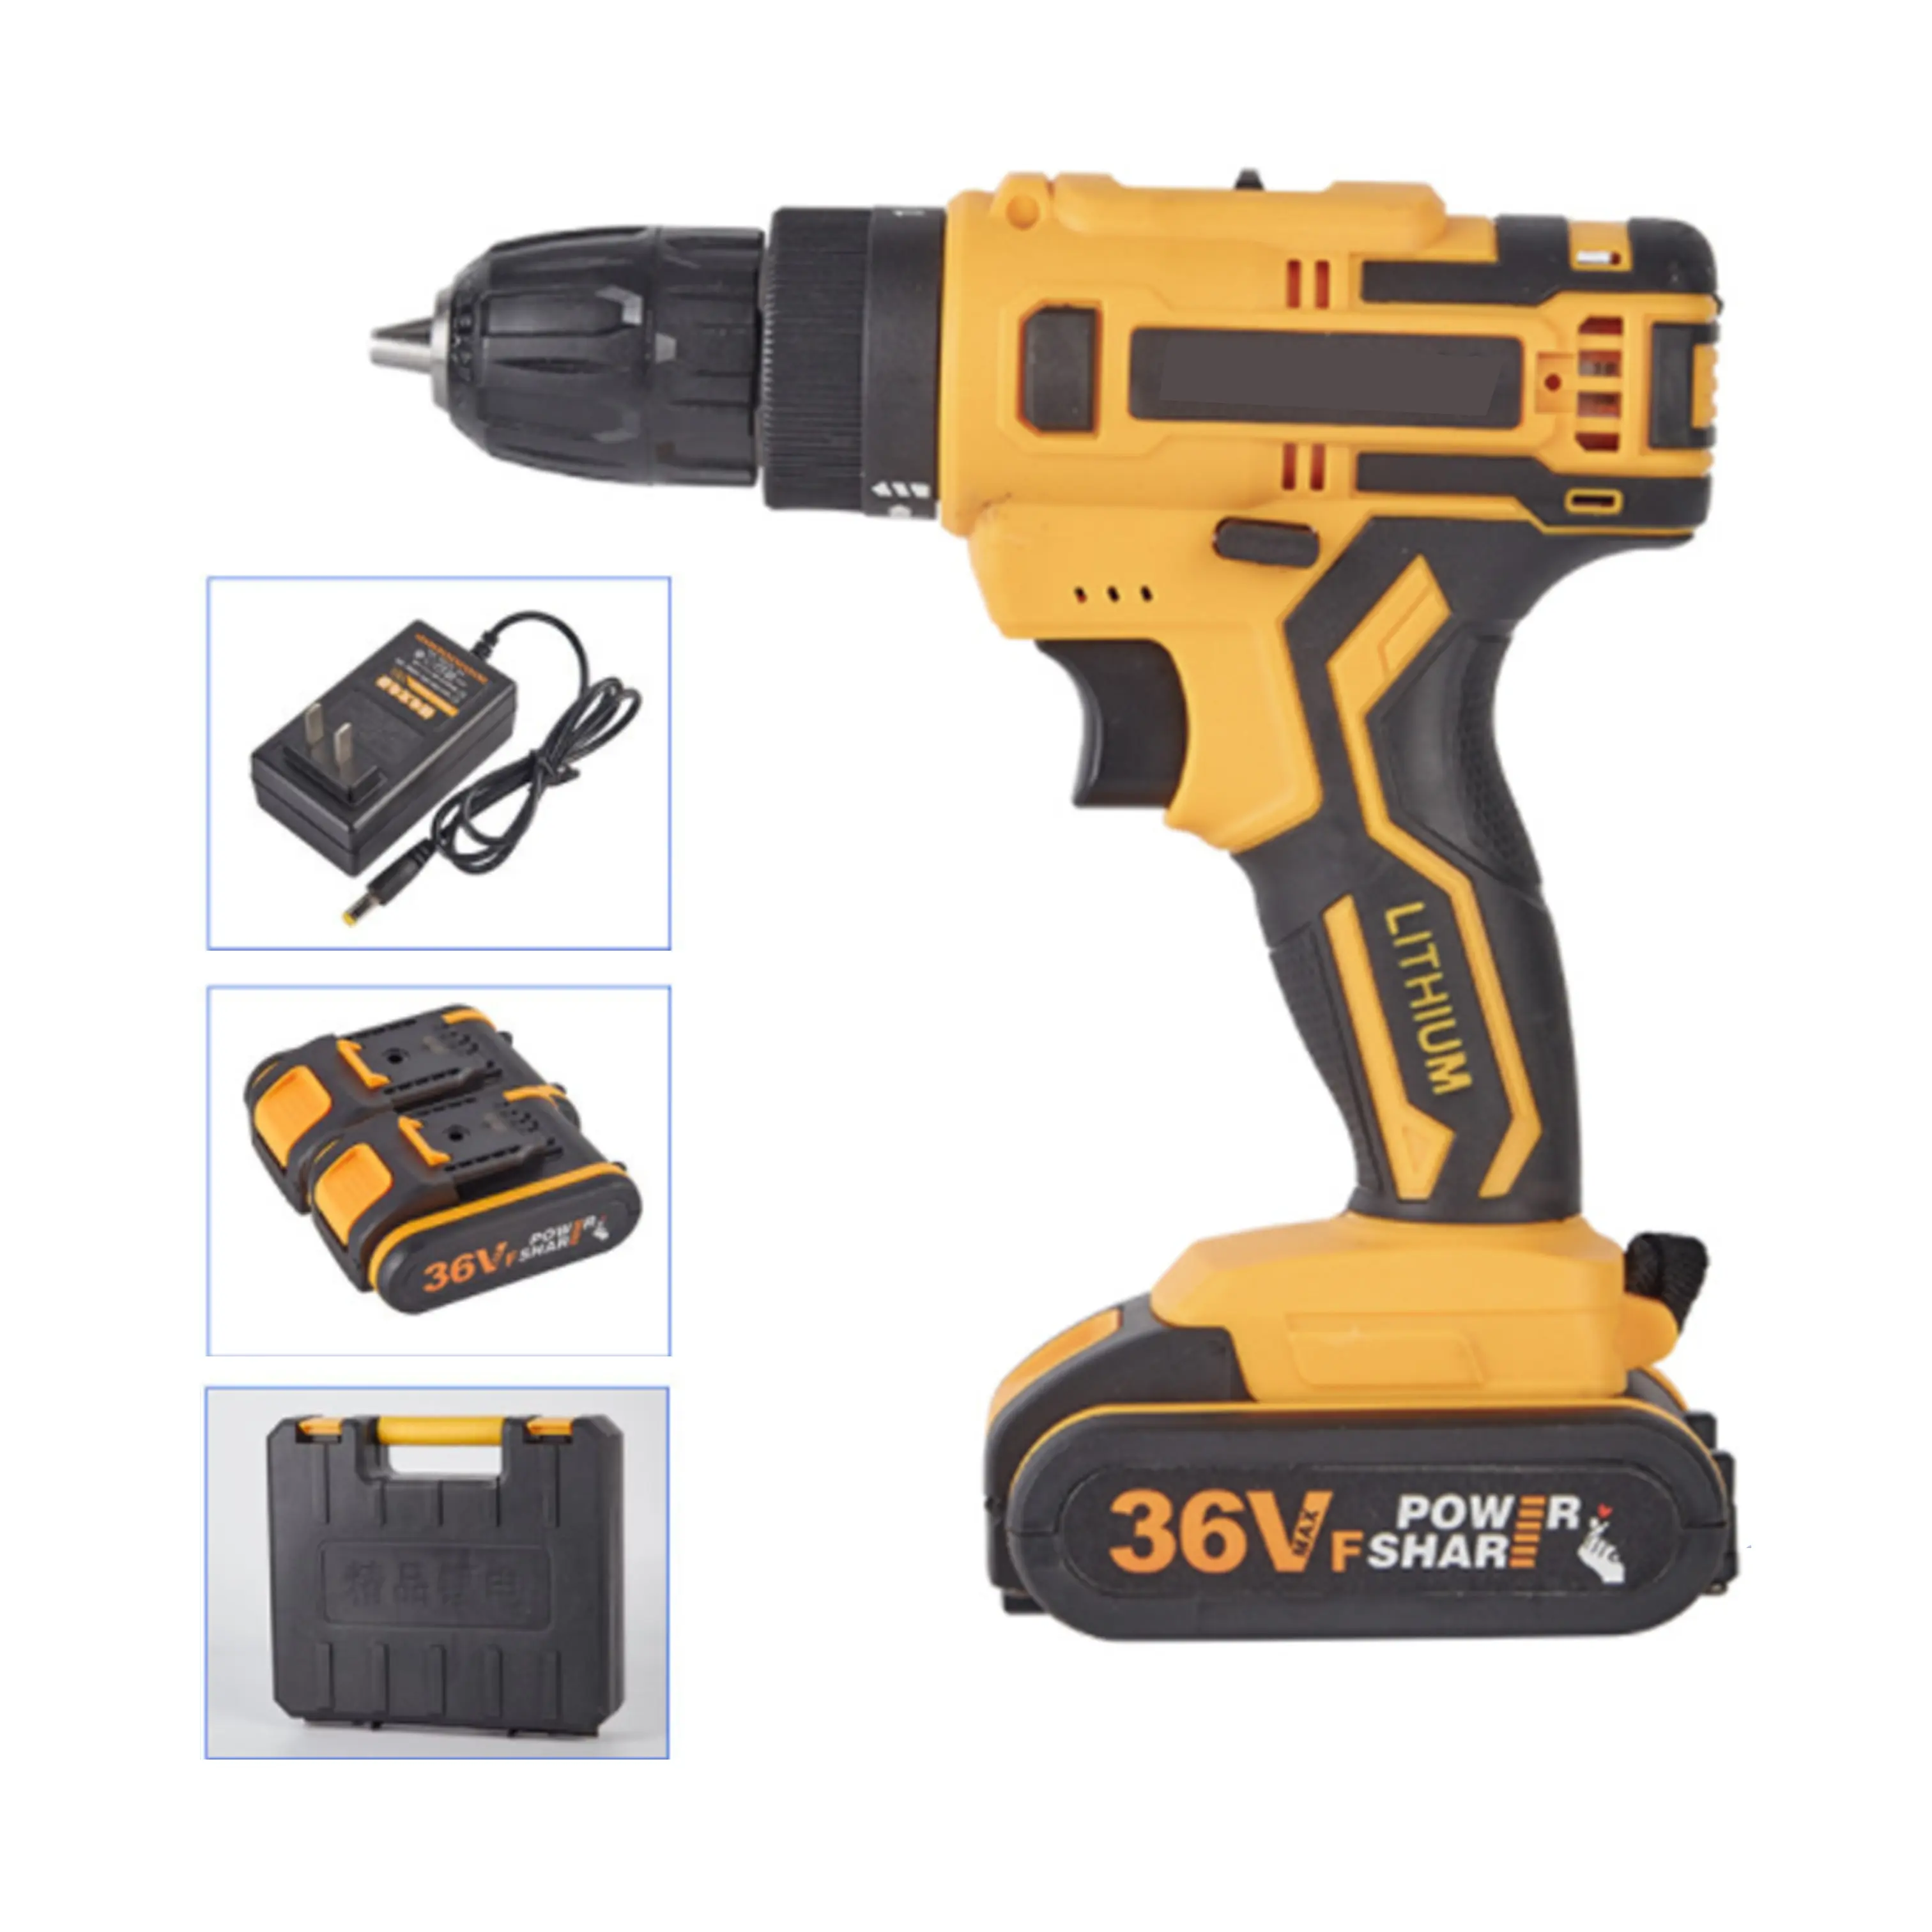 21V 1500mAh Cordless Drill Combo Cordless Hammer Drill Electric Drills Variable speed for Sale